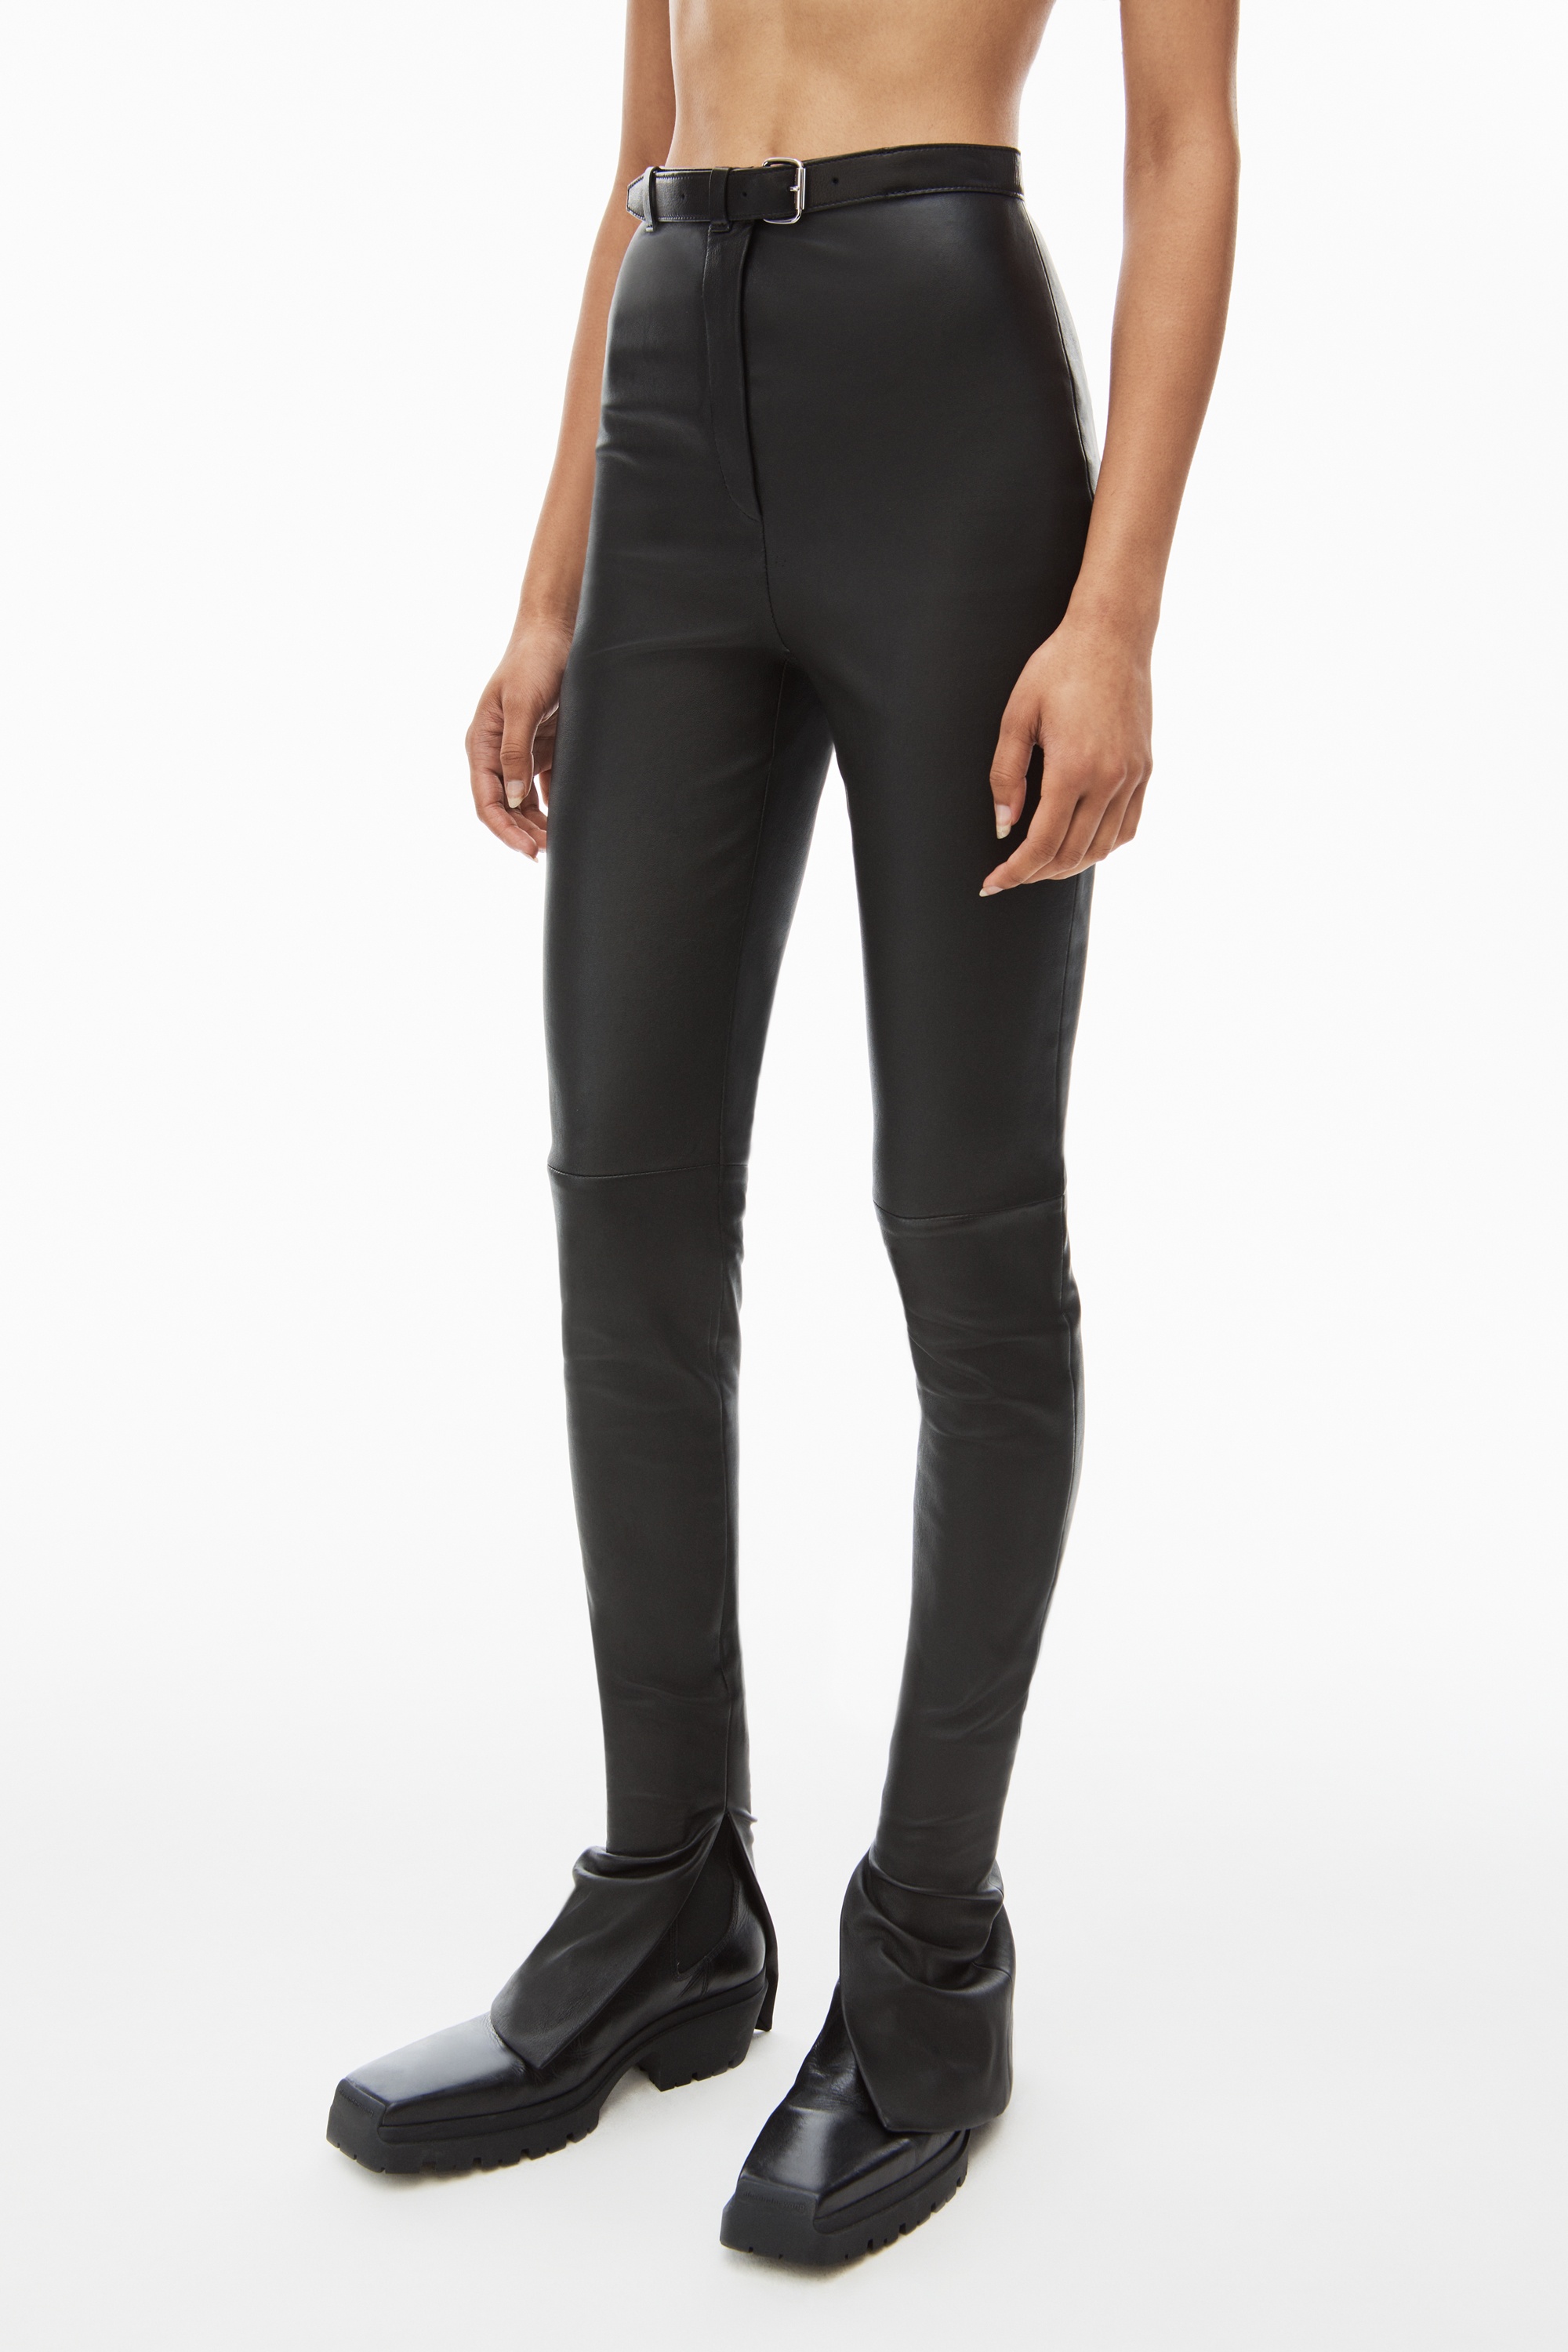 lambskin tailored legging with leather belt - 3